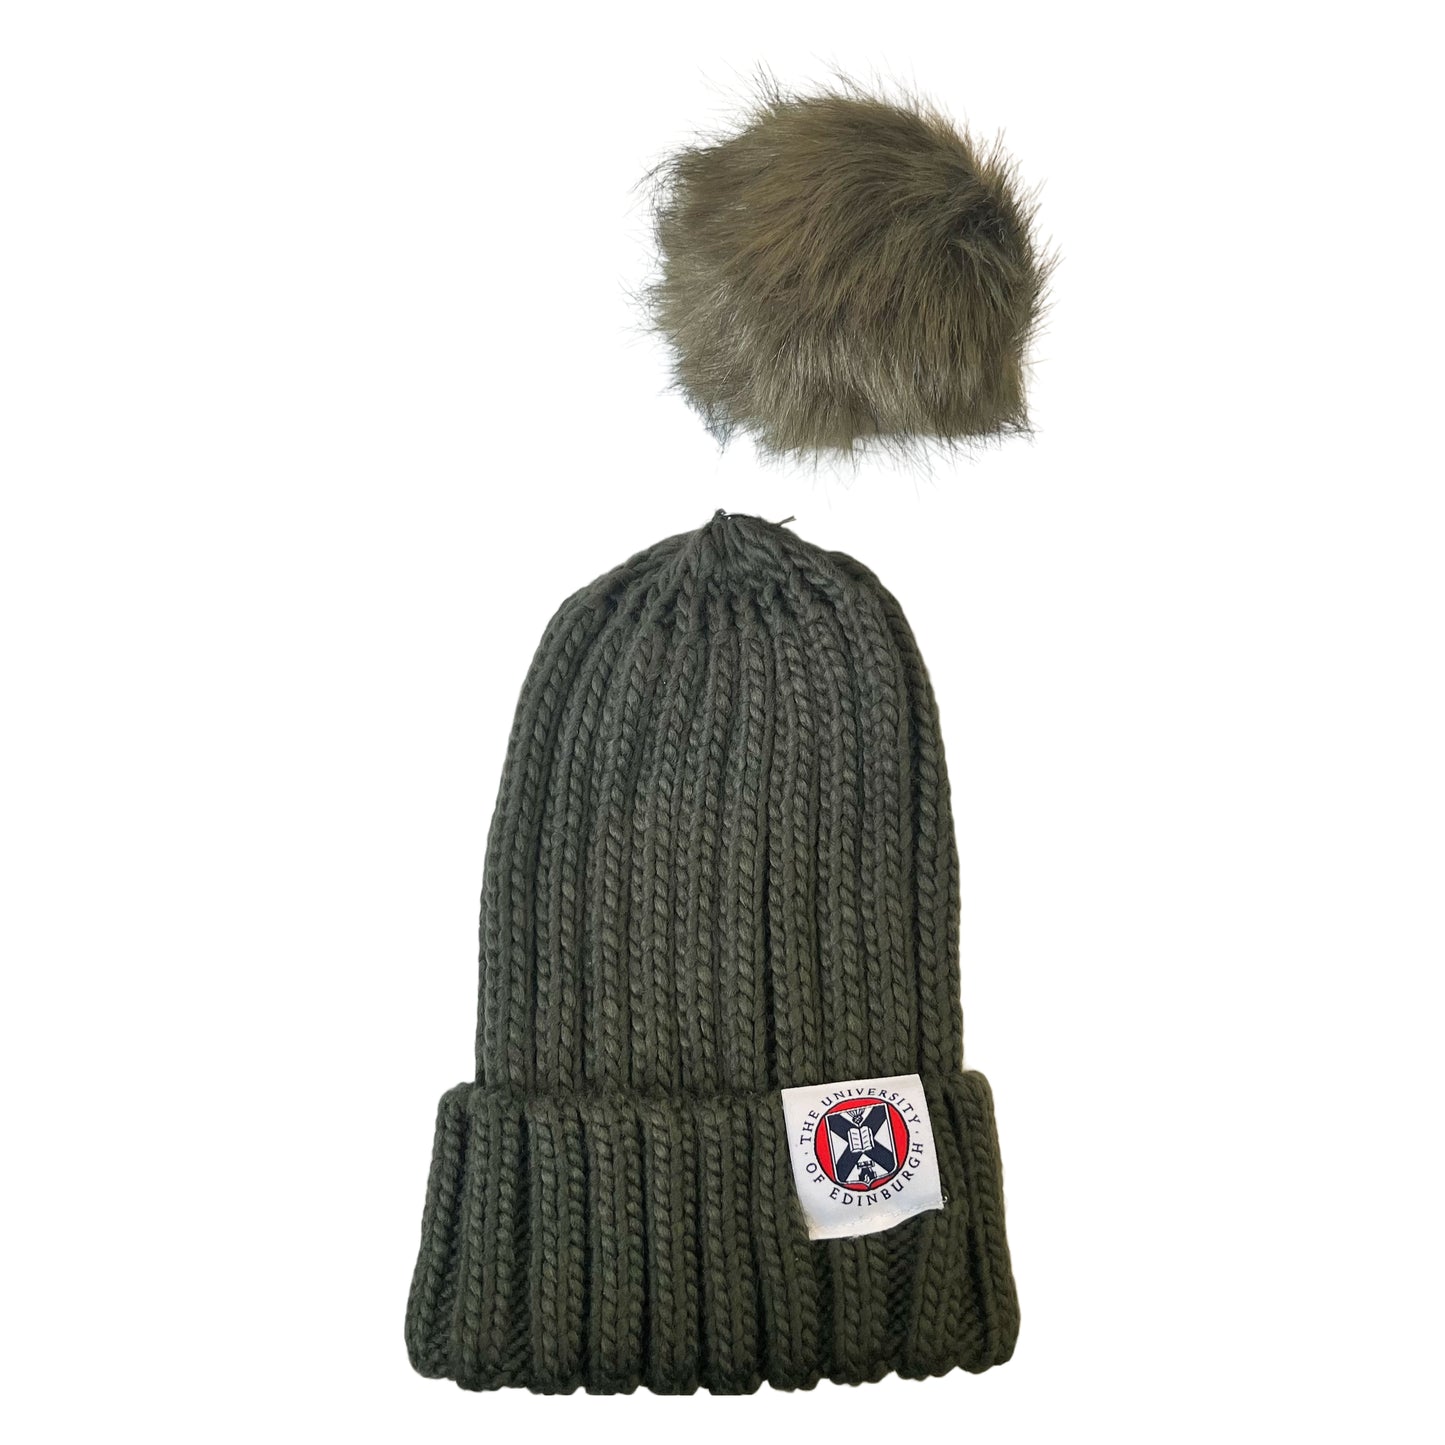 Olive Green knit beanie with detached faux fur pom pom and woven label featuring university crest